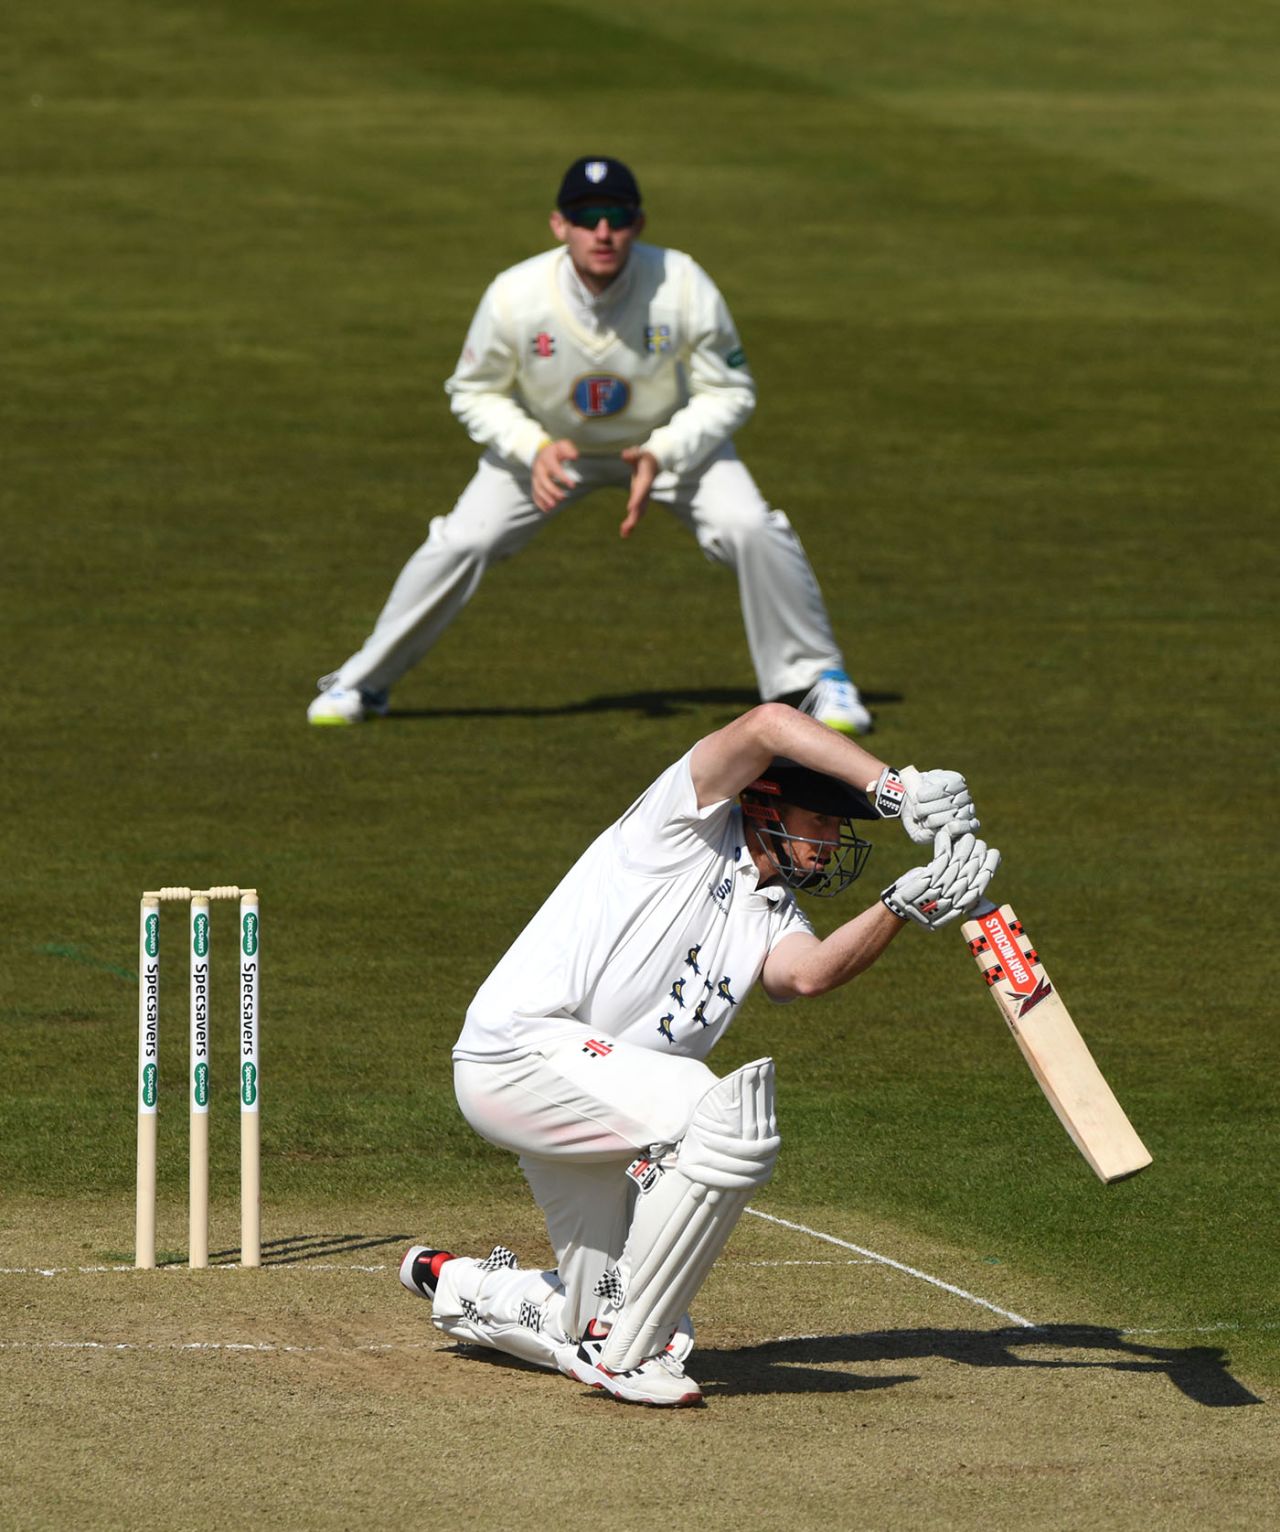 Luke Wells anchored the innings with 98 not out, Durham v Sussex, Chester-le-Street, 2nd day, April 12, 2019